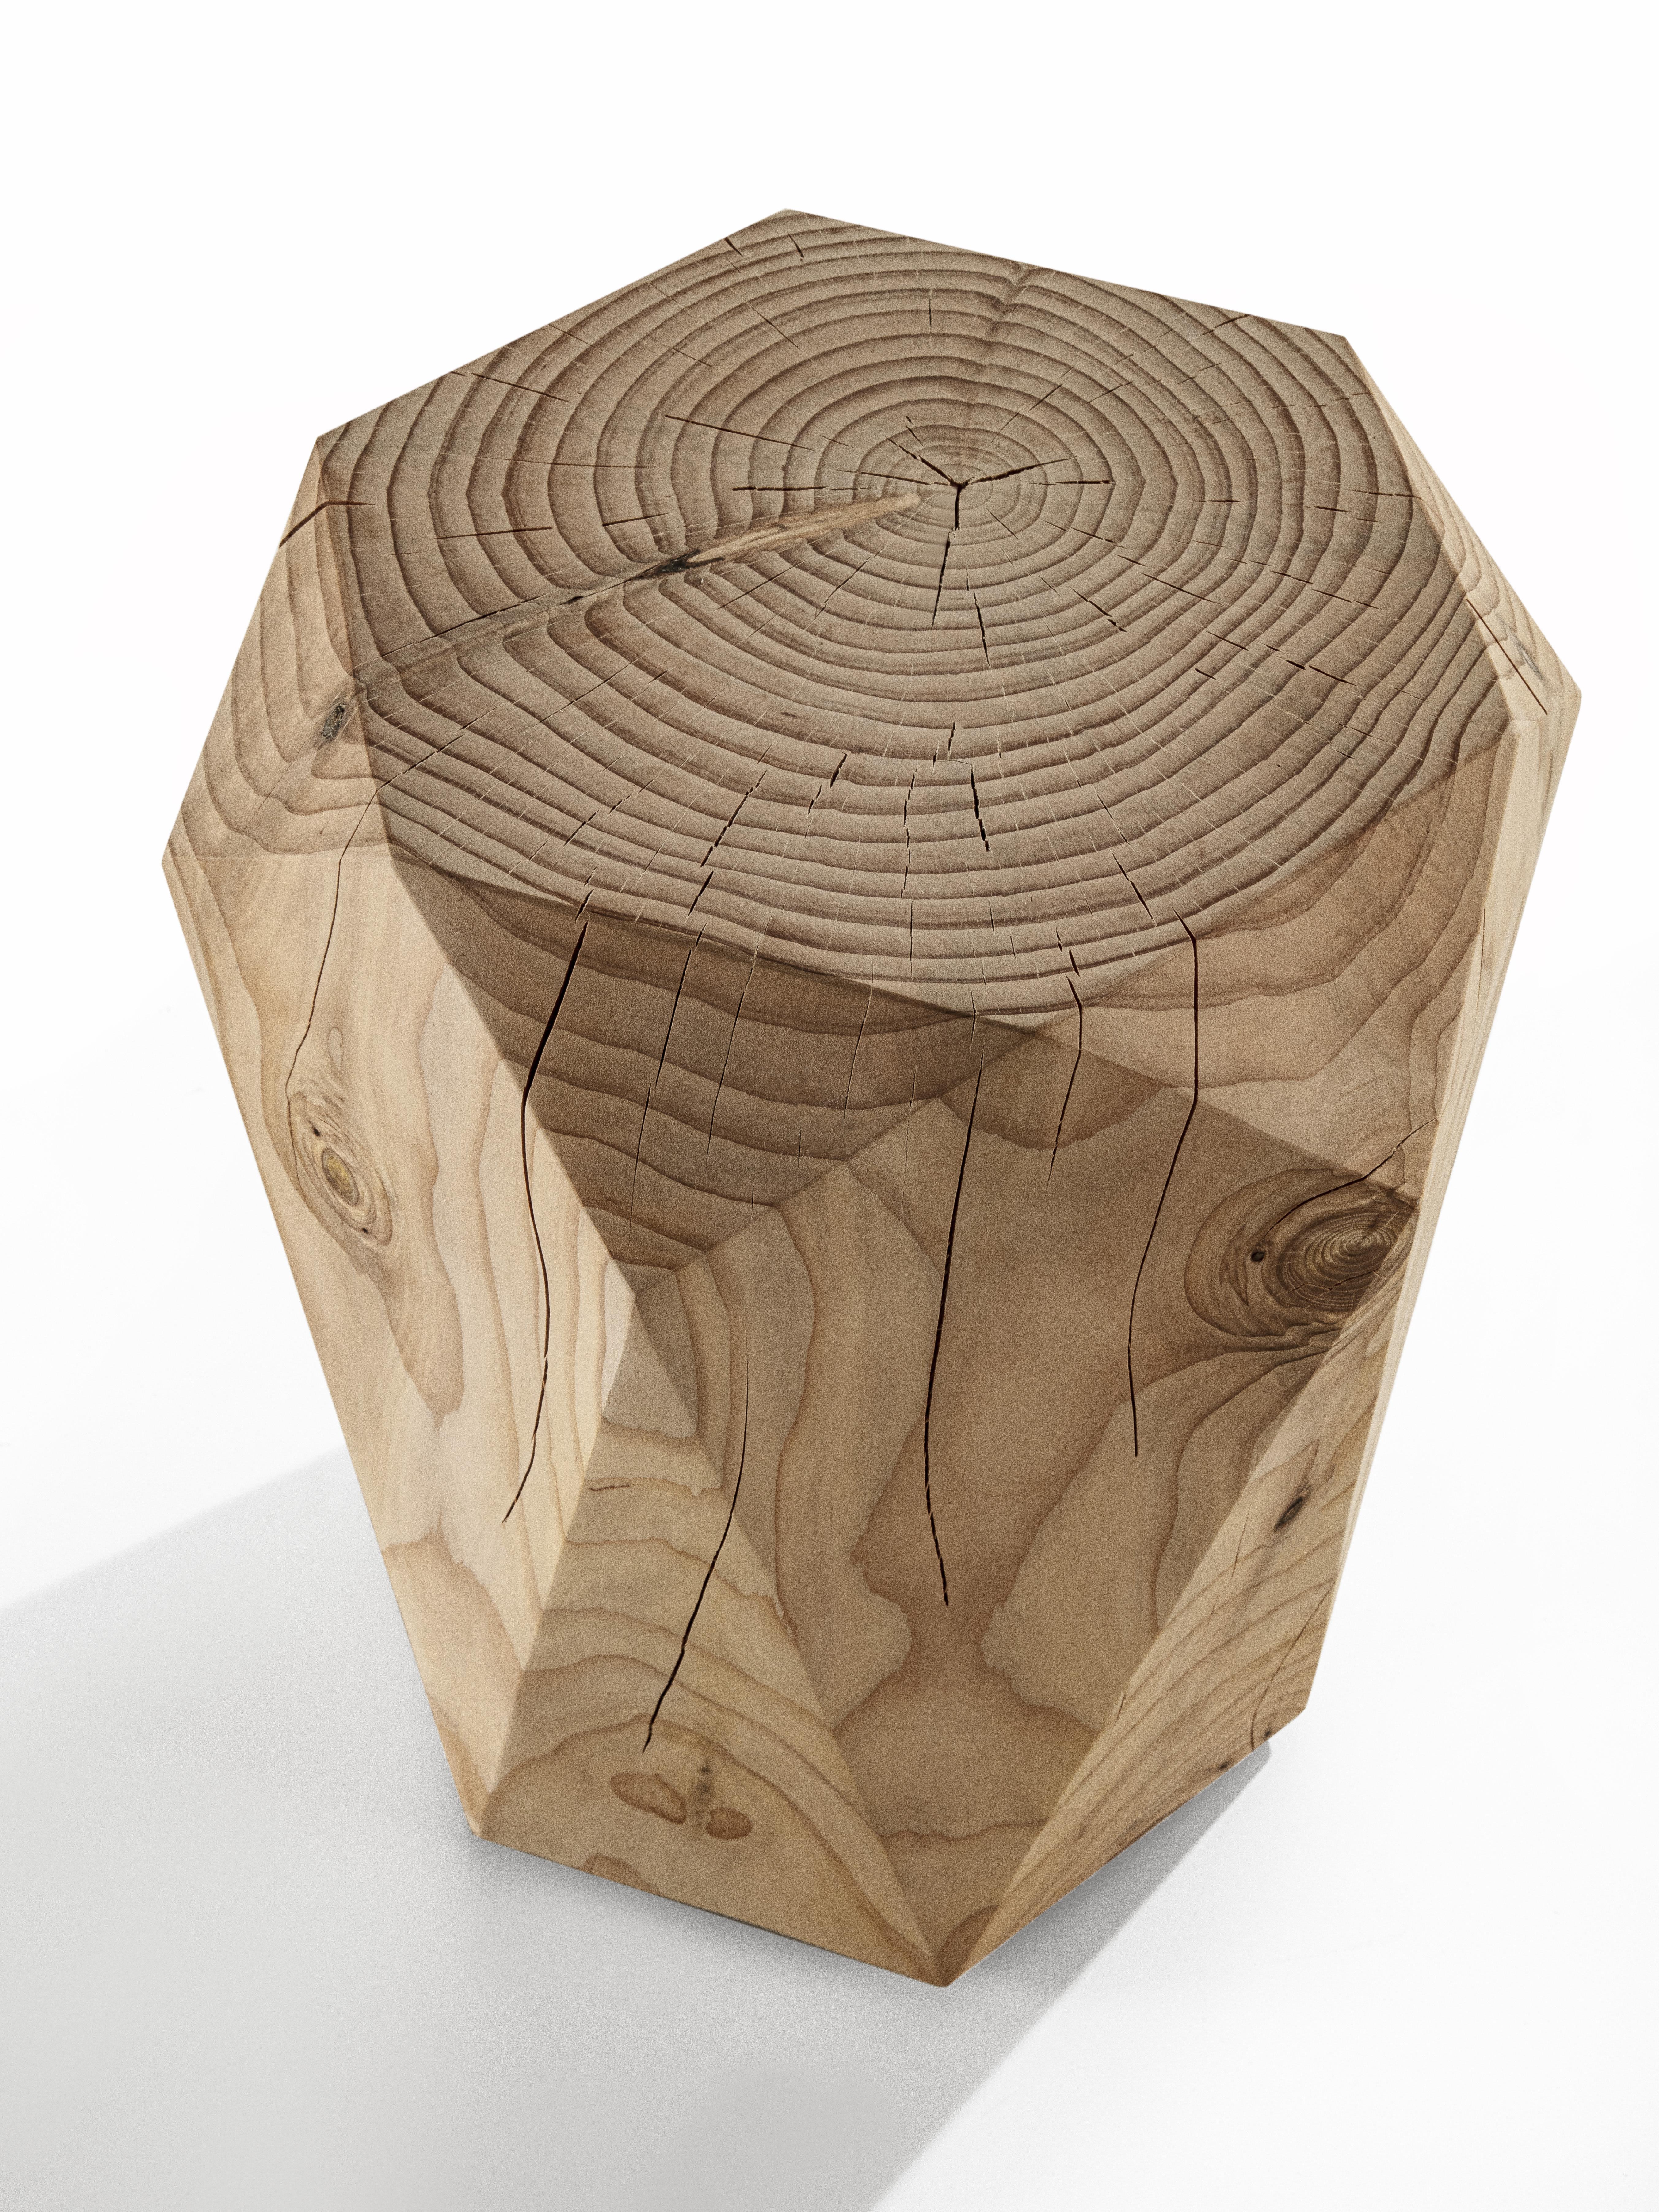 Stool made of a single block of scented cedar with hexagonal base, which develops with a symmetry of faceting that recalls the eternal elegance of precious stones.